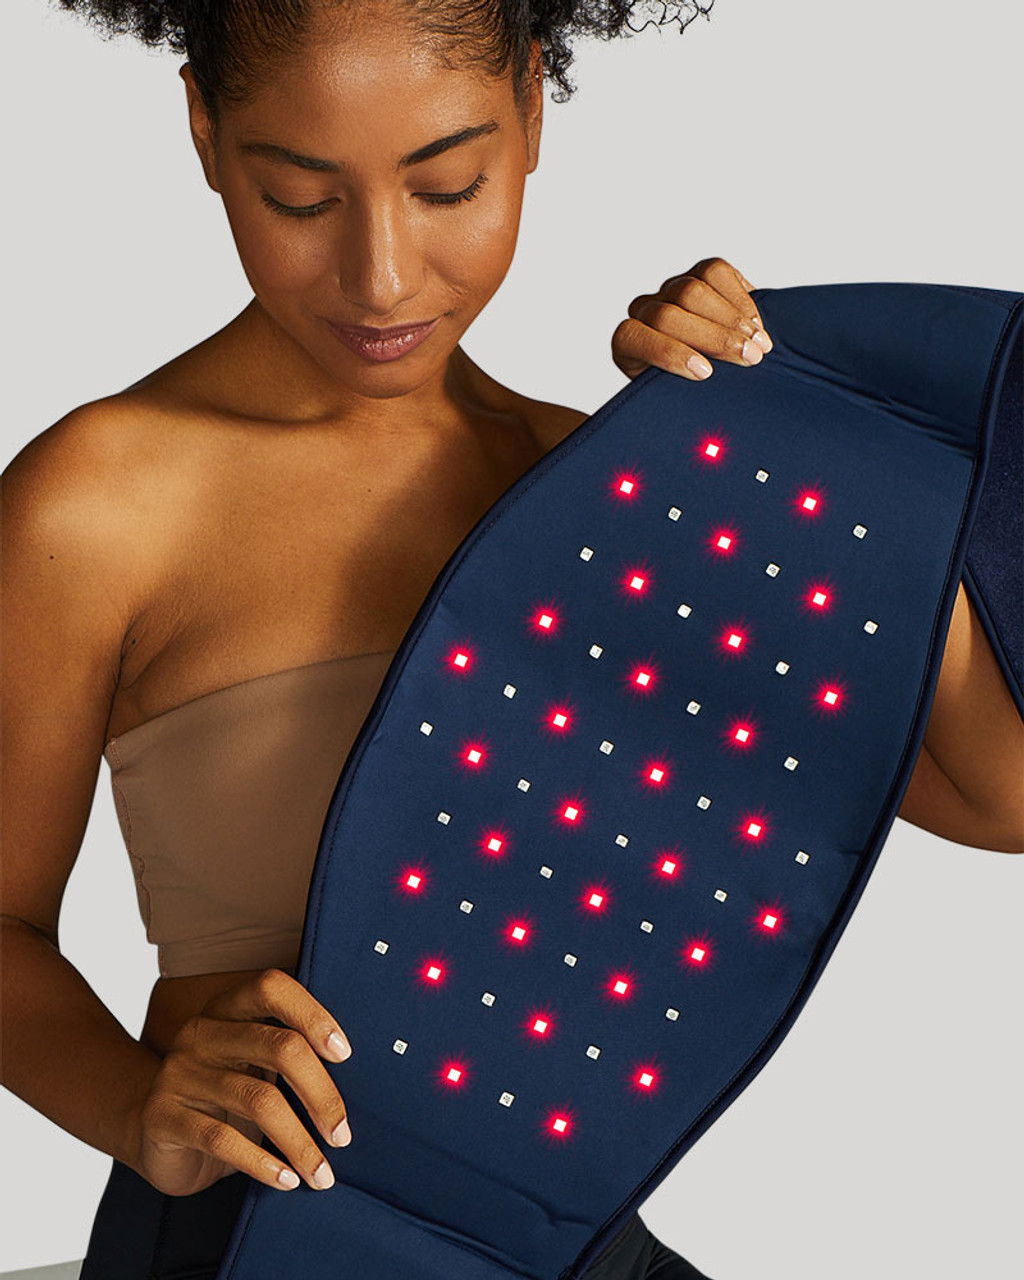  Tommie Copper Infrared Back Wrap, Unisex, Men & Women   Rechargeable & Adjustable Red Light Therapy Support for Circulation, Sore  Joints, Muscle Aches & Stiffness : Health & Household